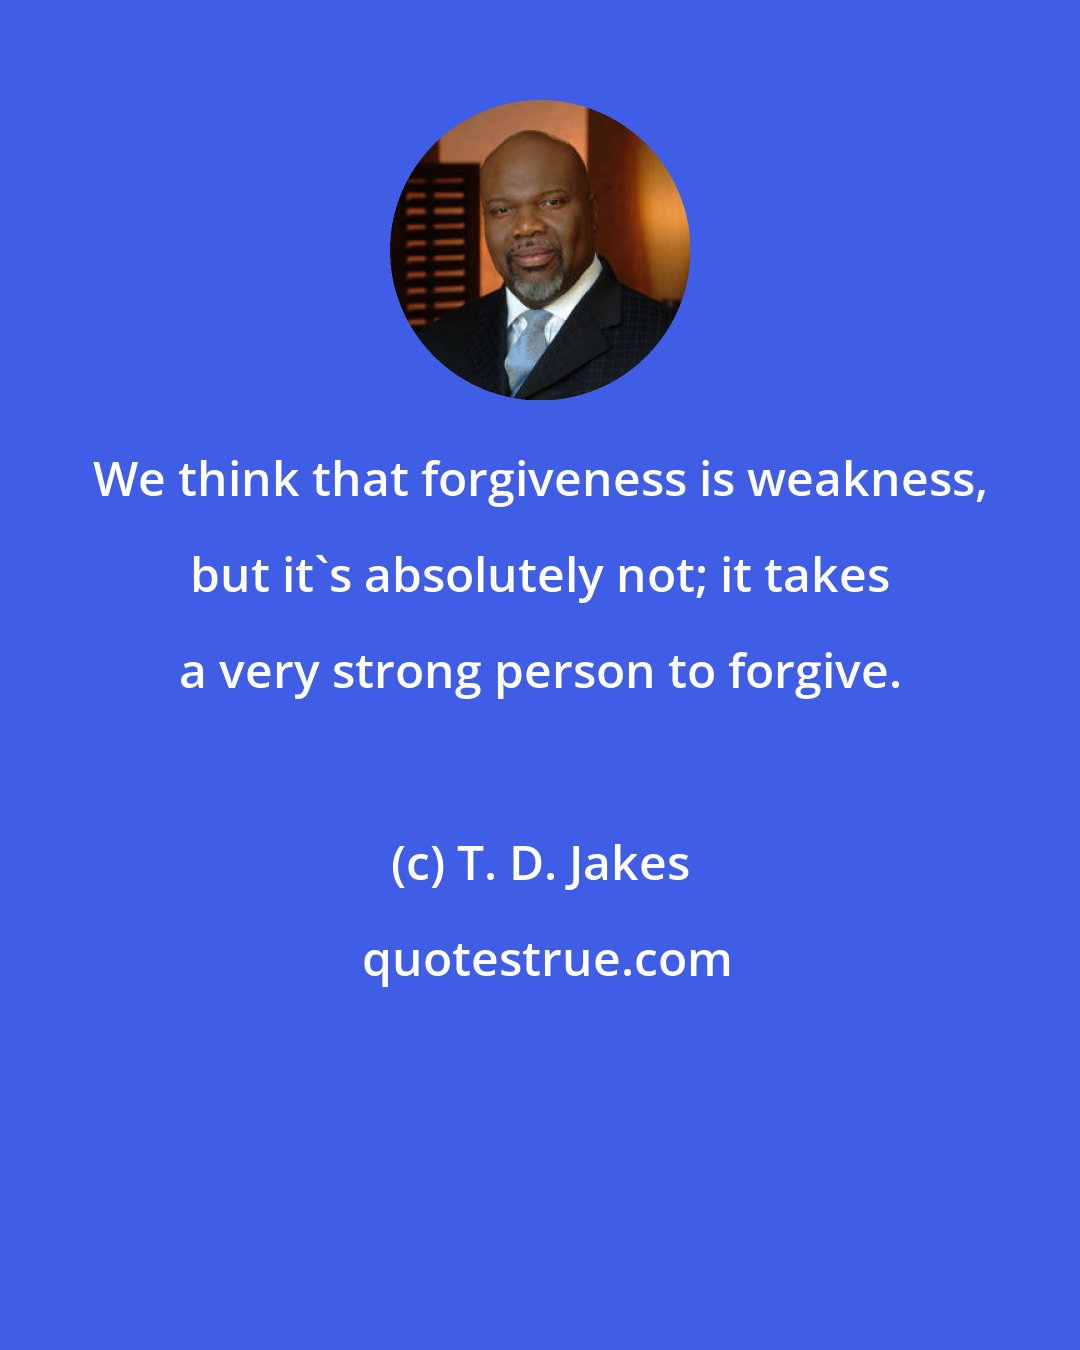 T. D. Jakes: We think that forgiveness is weakness, but it's absolutely not; it takes a very strong person to forgive.